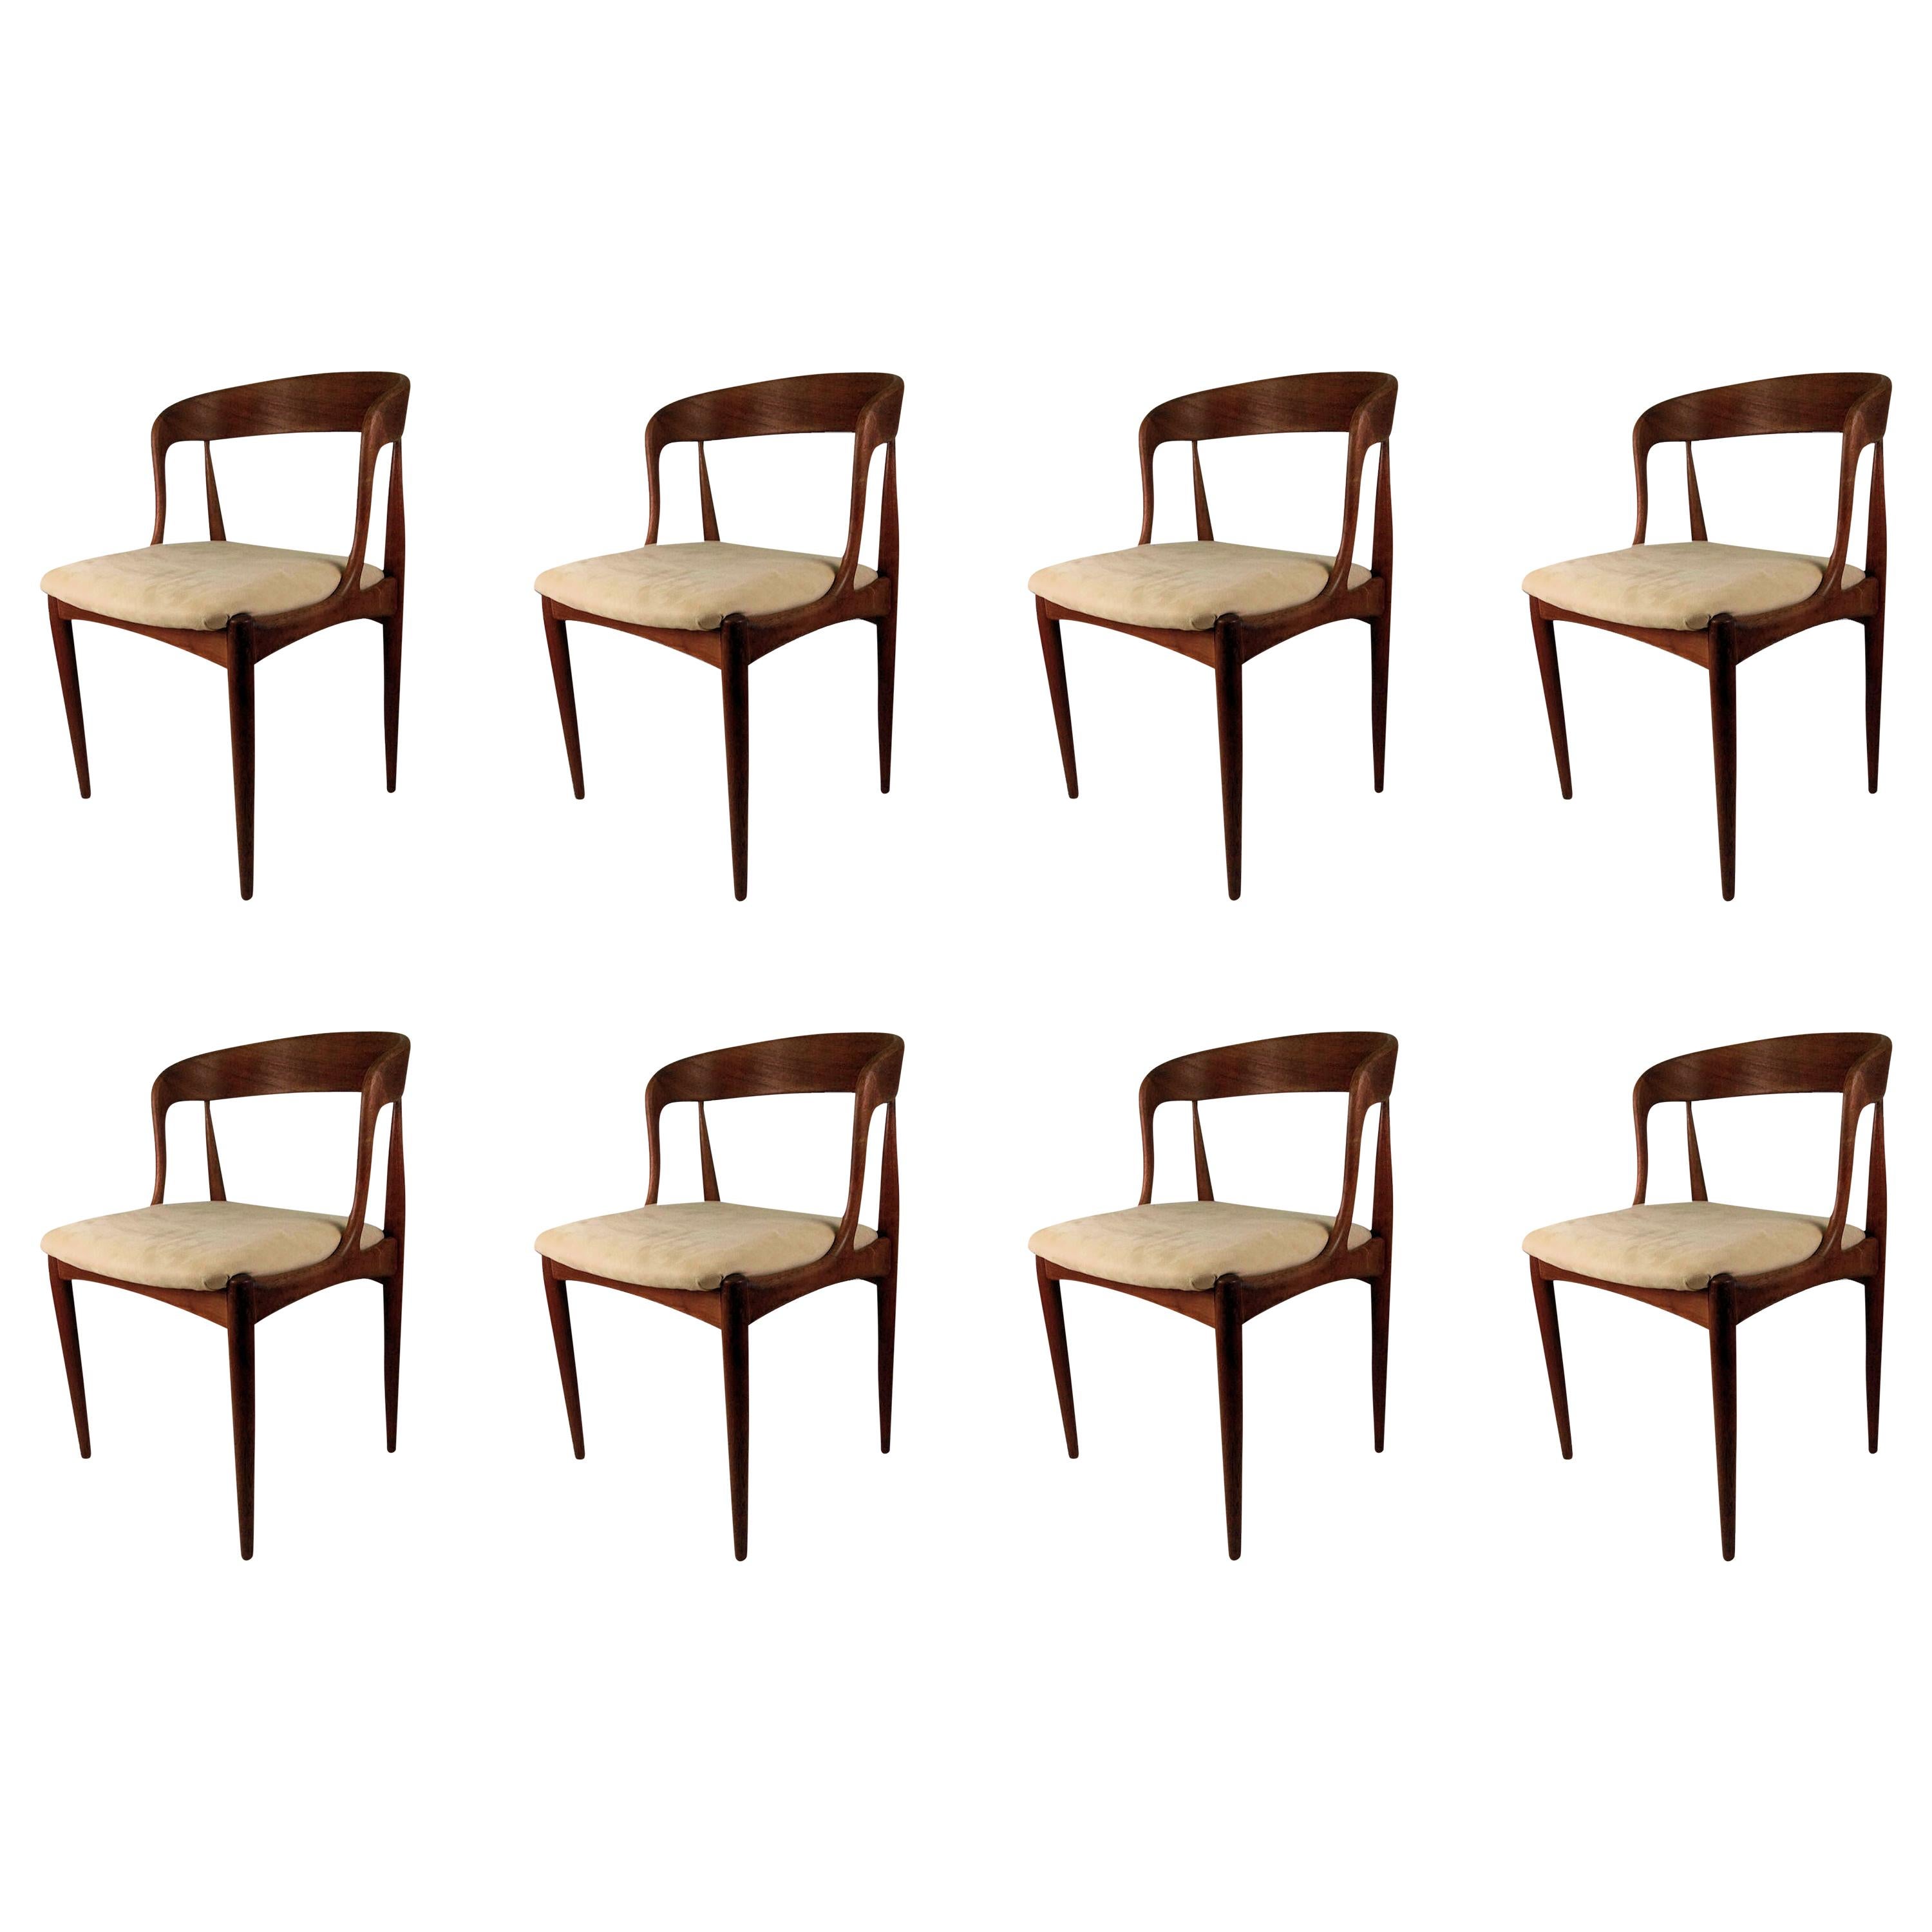 1960s Set of Eight Johannes Andersen Dining Chairs in Teak Inc. Reupholstery